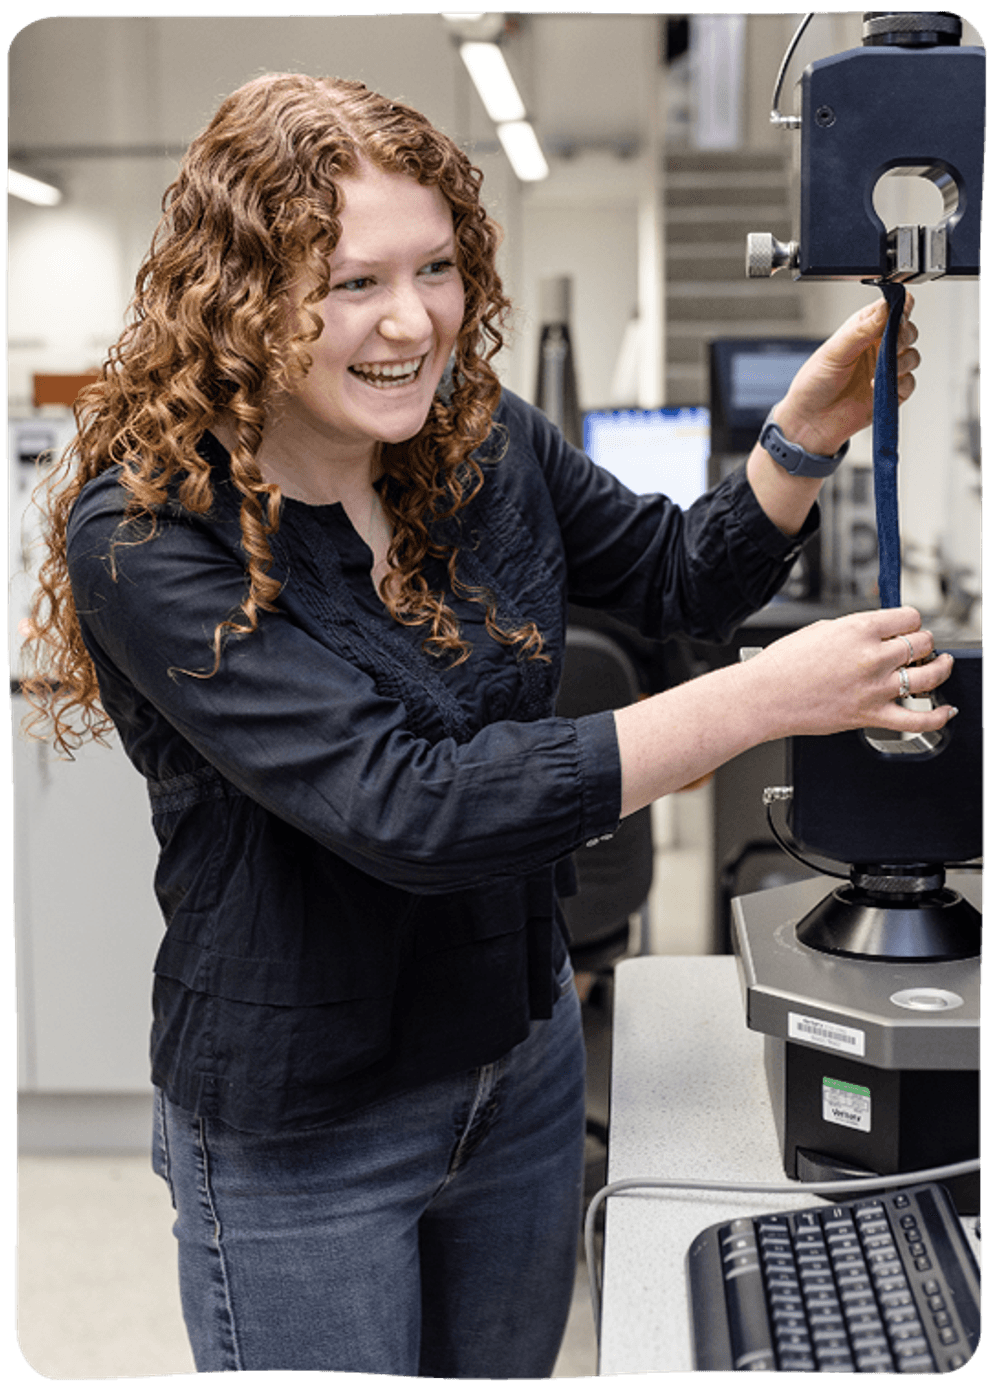 A young woman with curly hair is standing smiling while operating a machine in a lab.